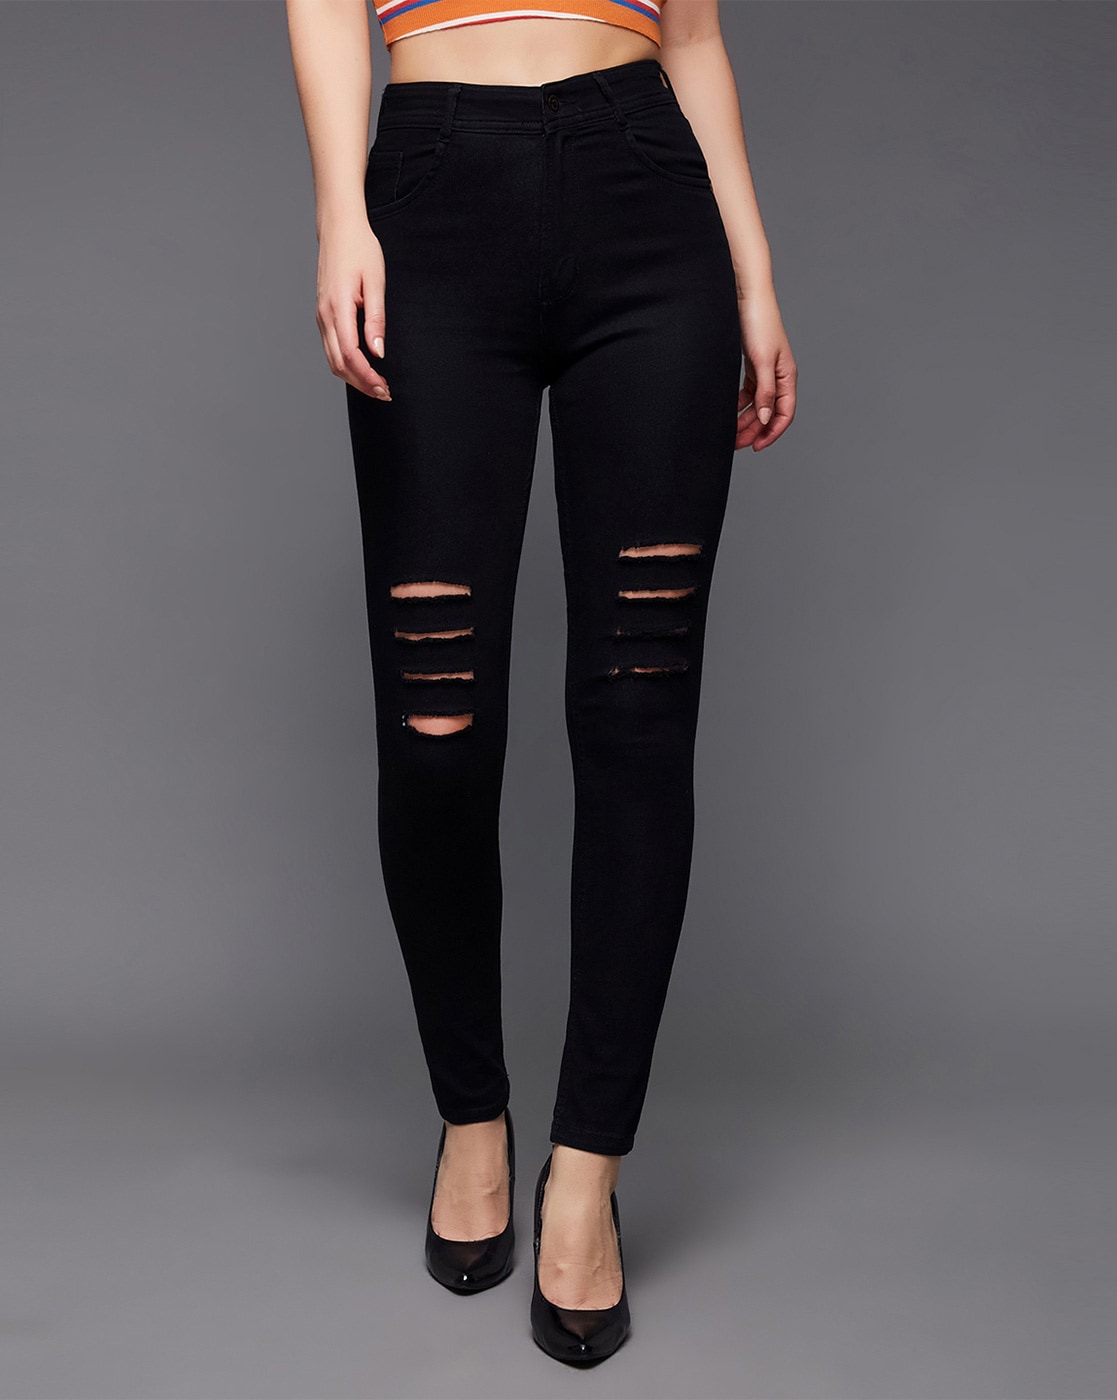 Women's Distressed Jeans & Ripped Jean Styles | Lucky Brand